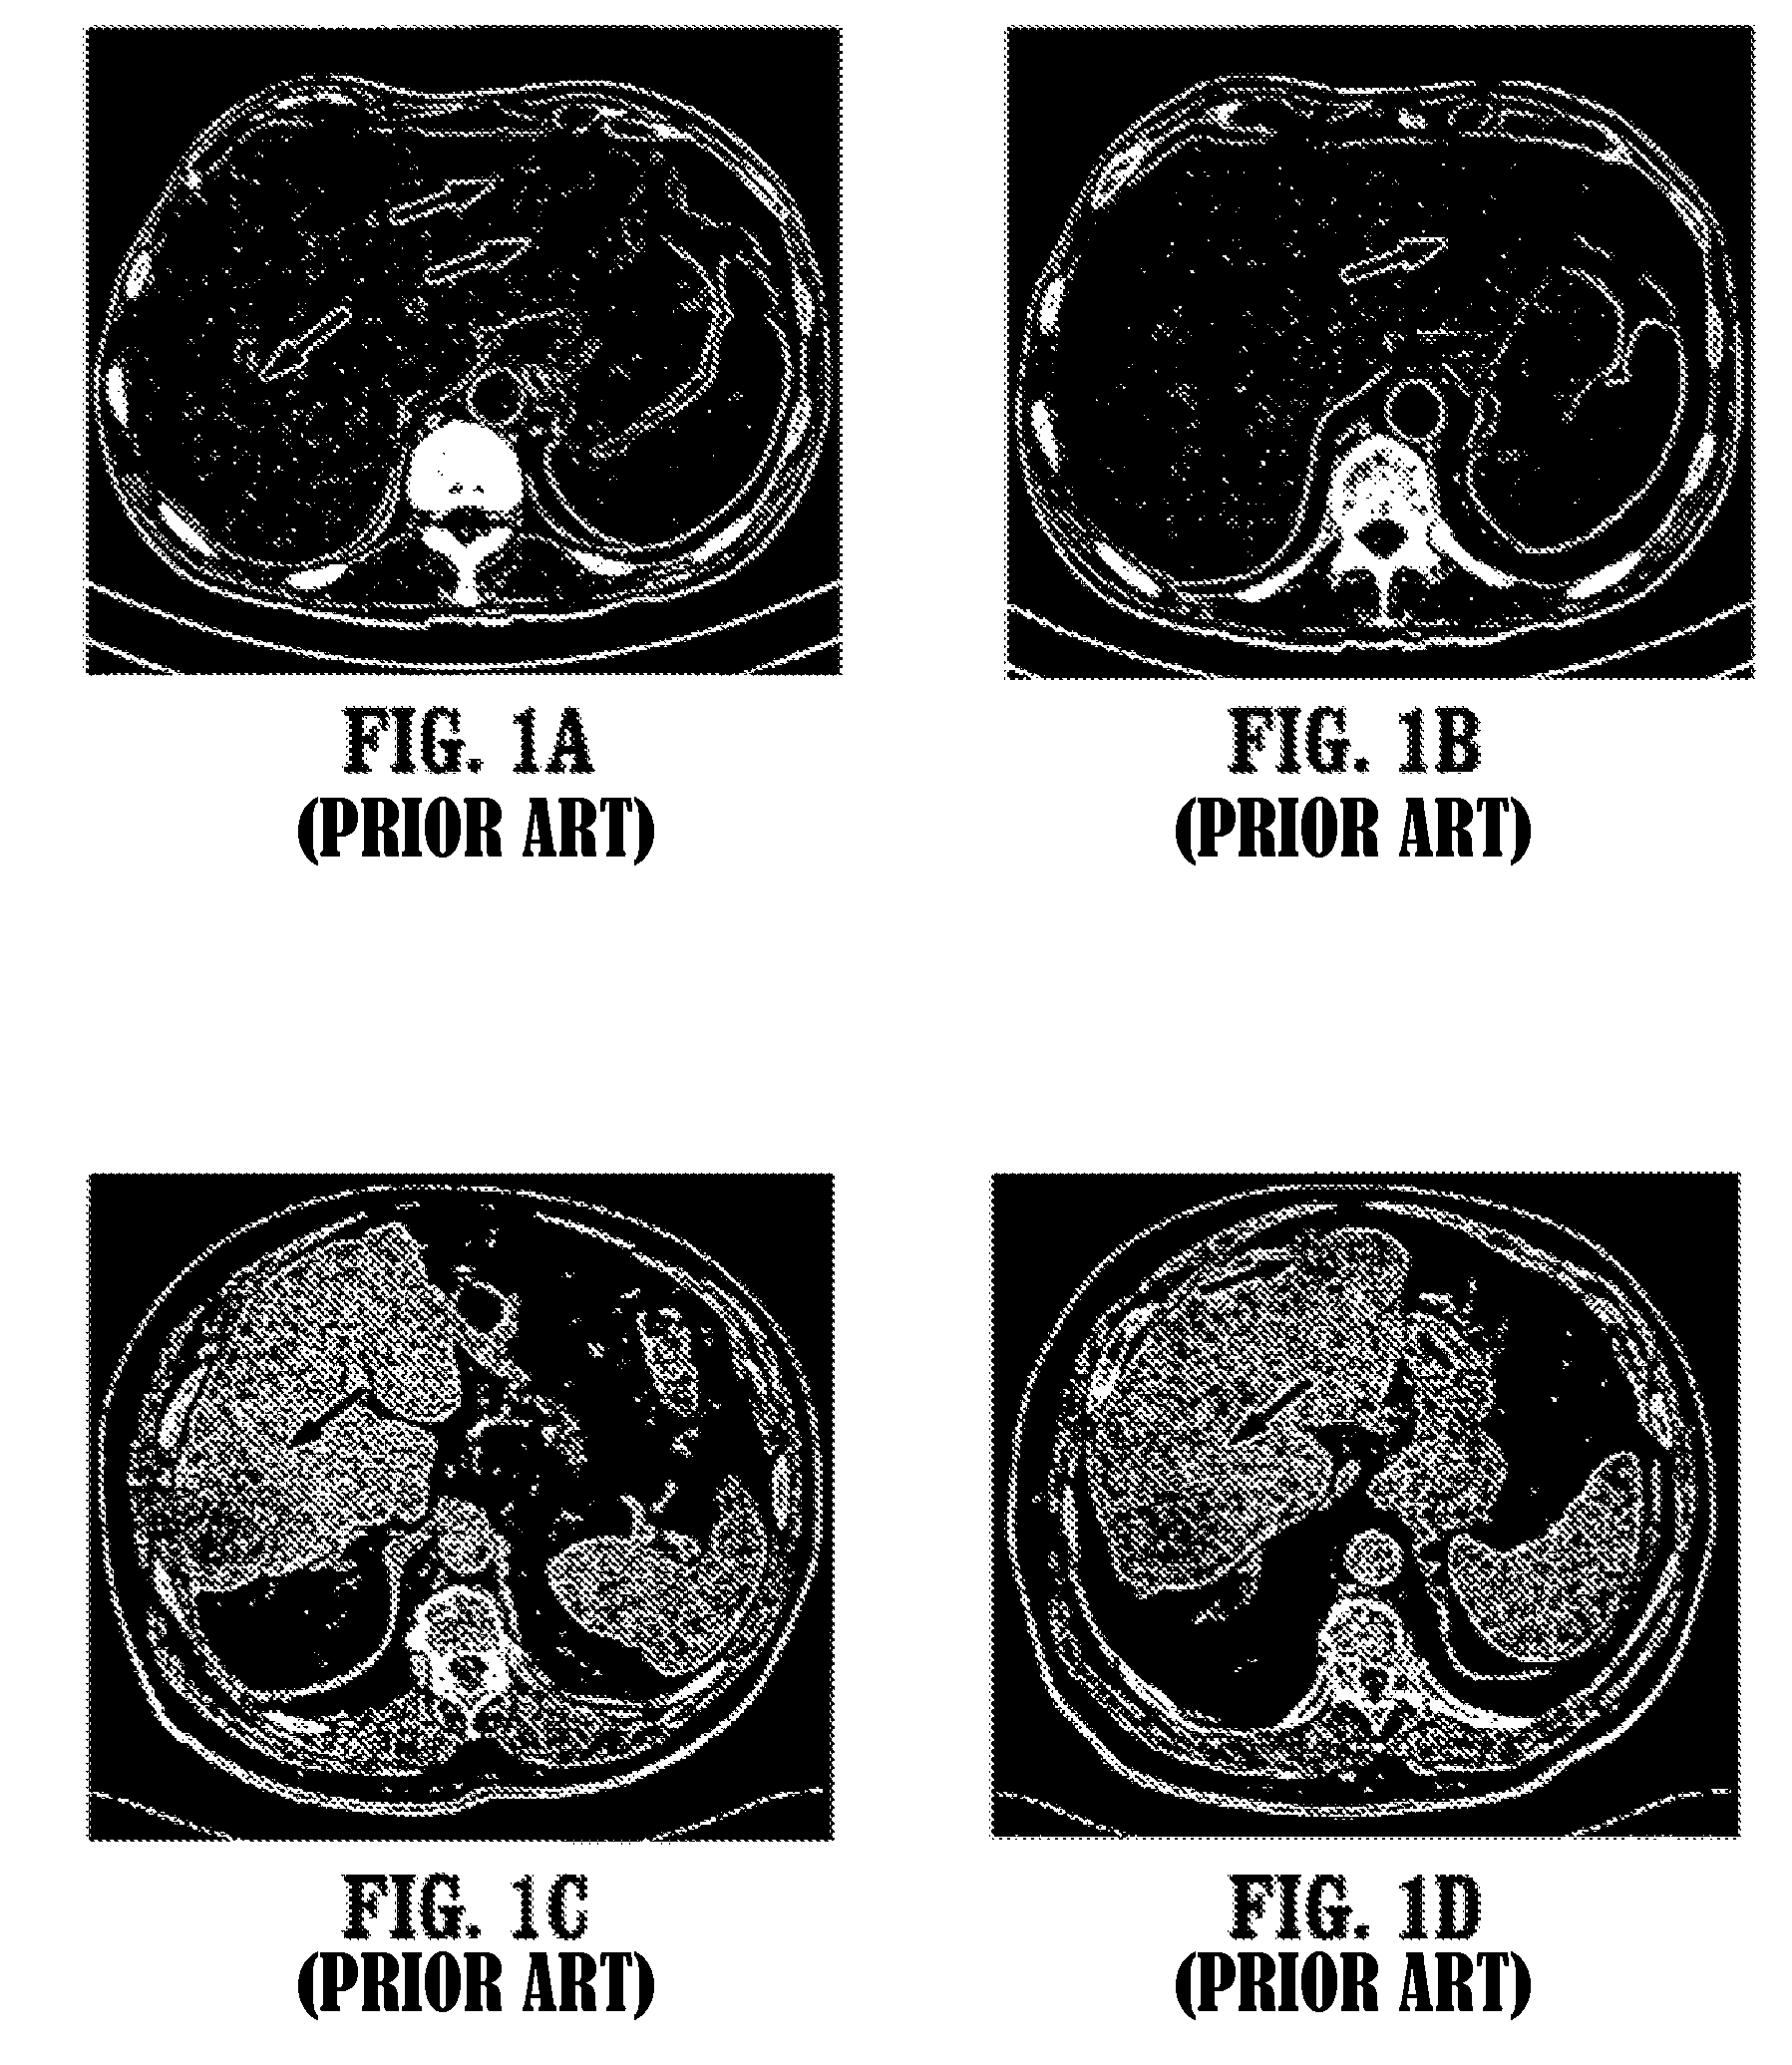 Systems and methods for segmenting object of interest from medical image